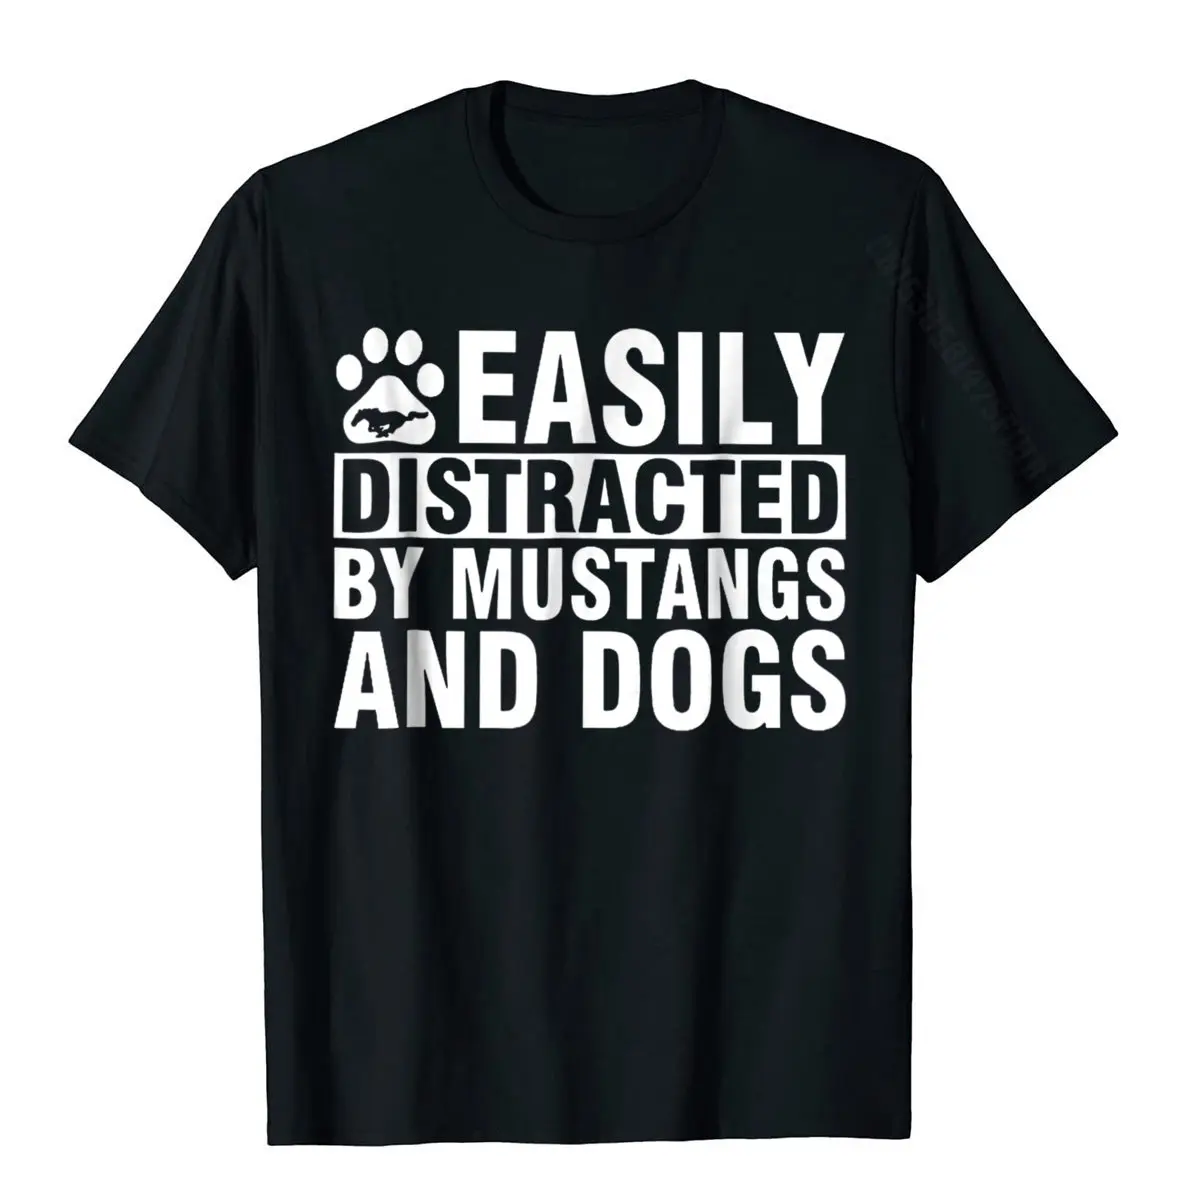 Easily Distracted By Mustangs And Dogs Funny T-Shirt Men Wholesale Hip Hop Tops Tees Cotton T Shirt Unique